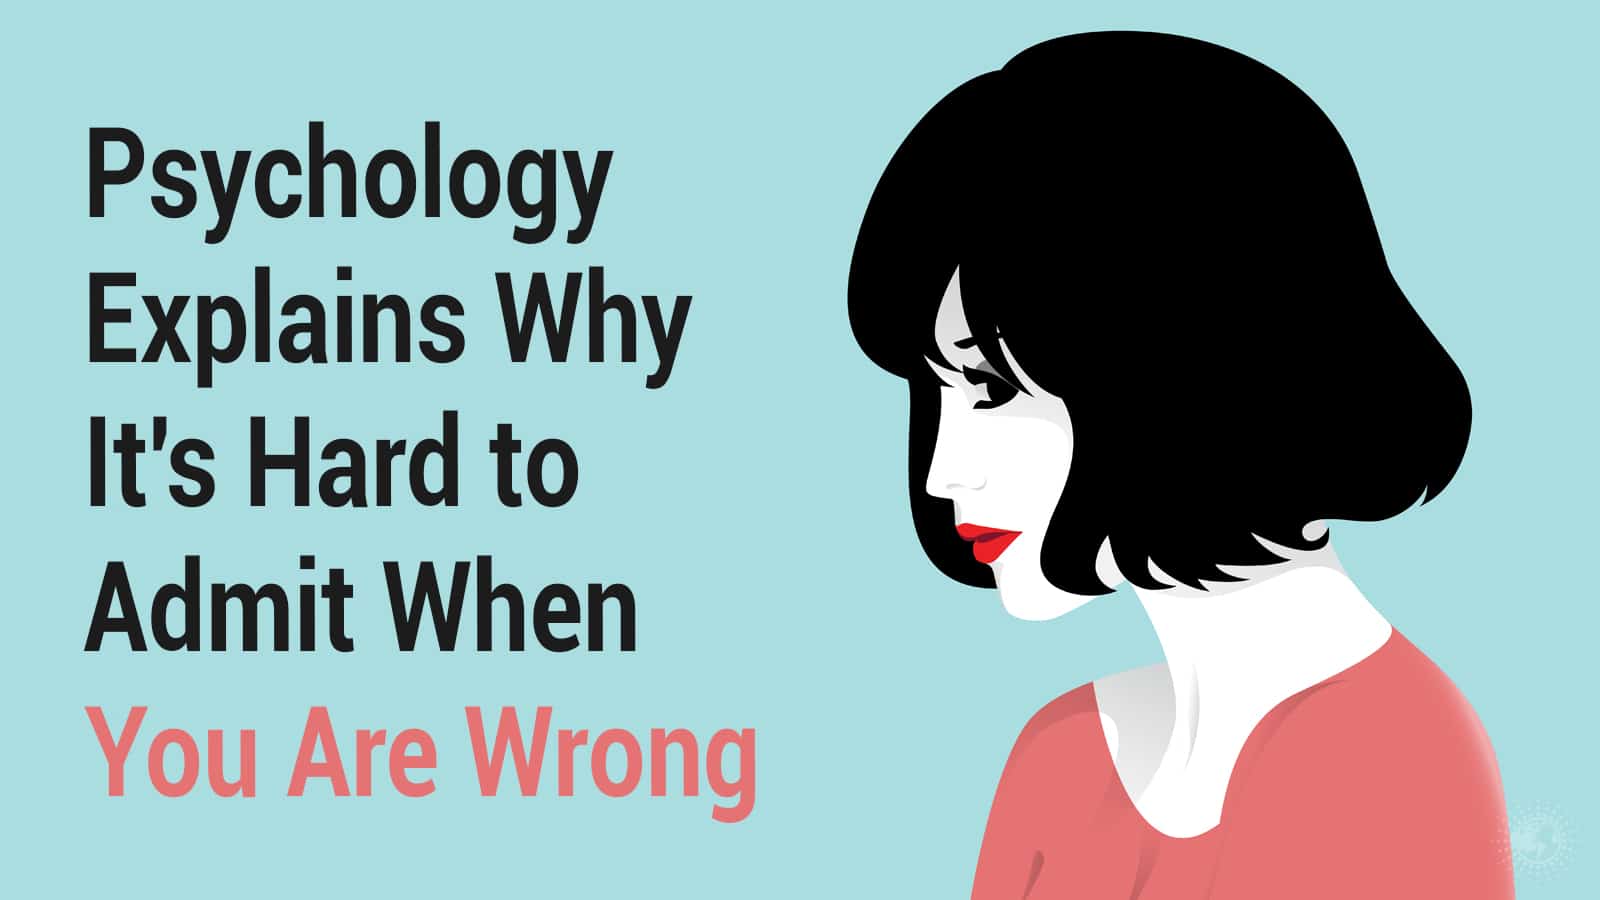 Psychology Explains Why It’s Hard to Admit When You Are Wrong